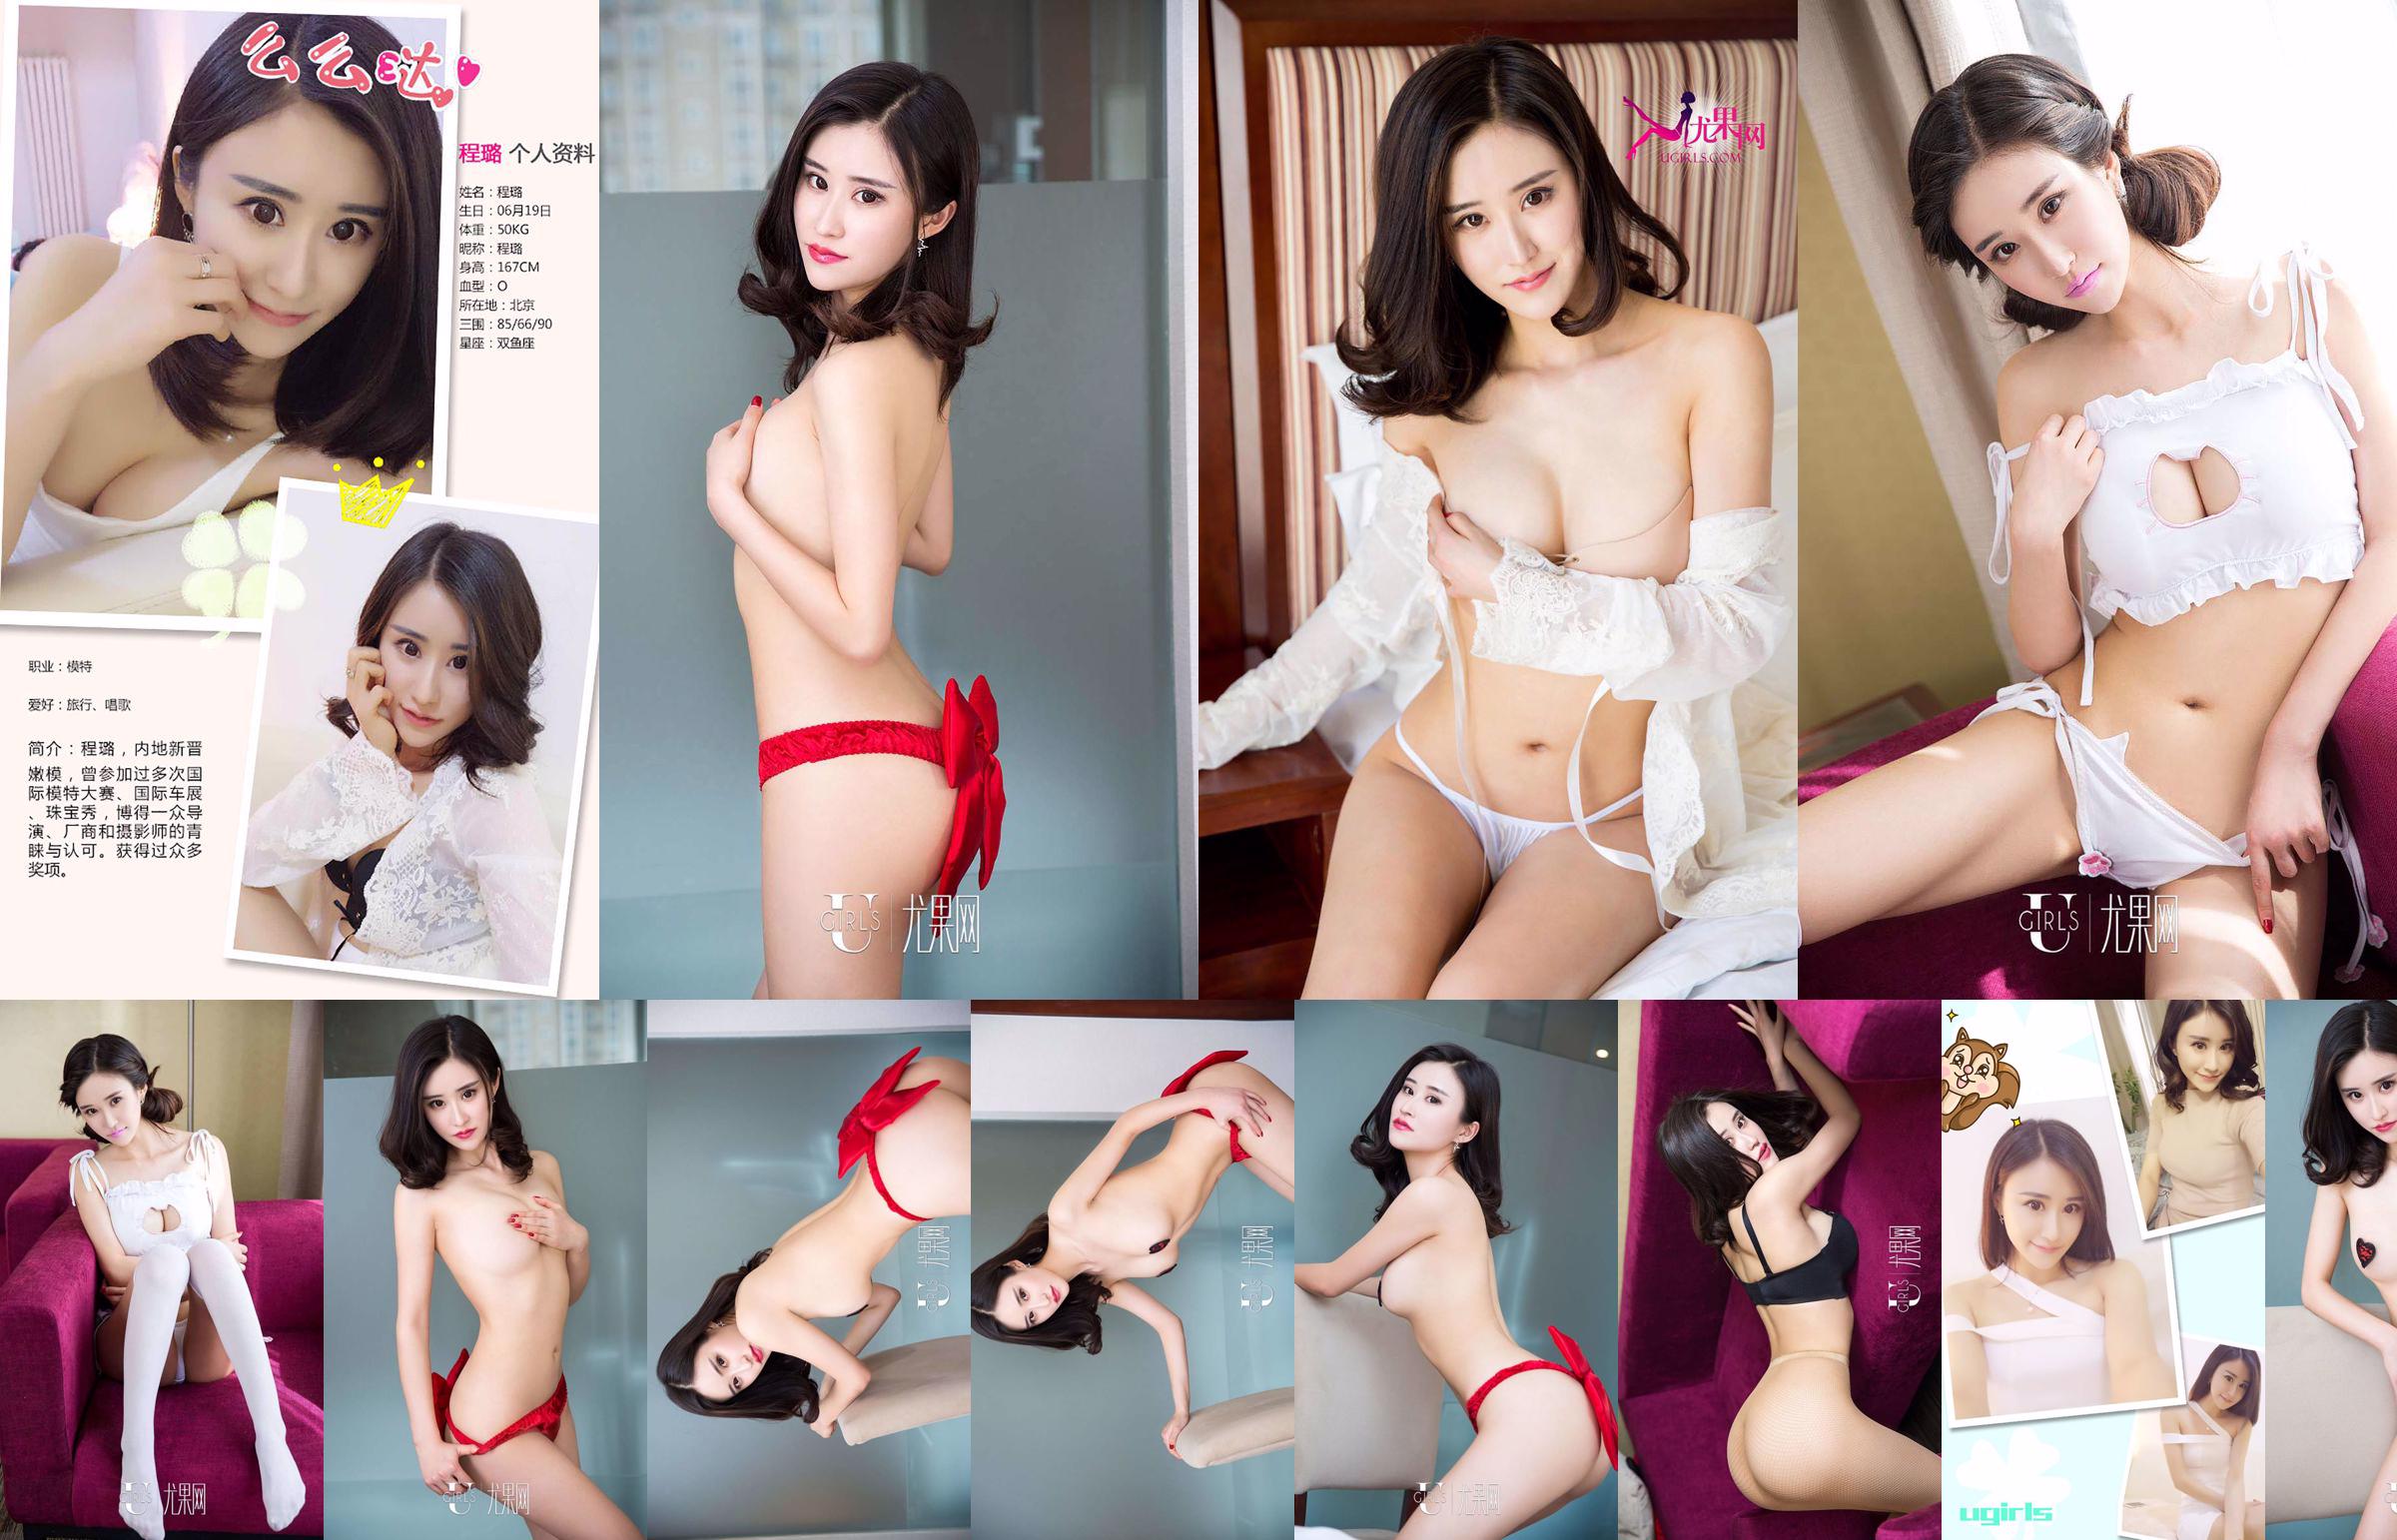 Cheng Lu "Butterfly Temptation" [爱优物Ugirls] No.361 No.050aa3 Page 2